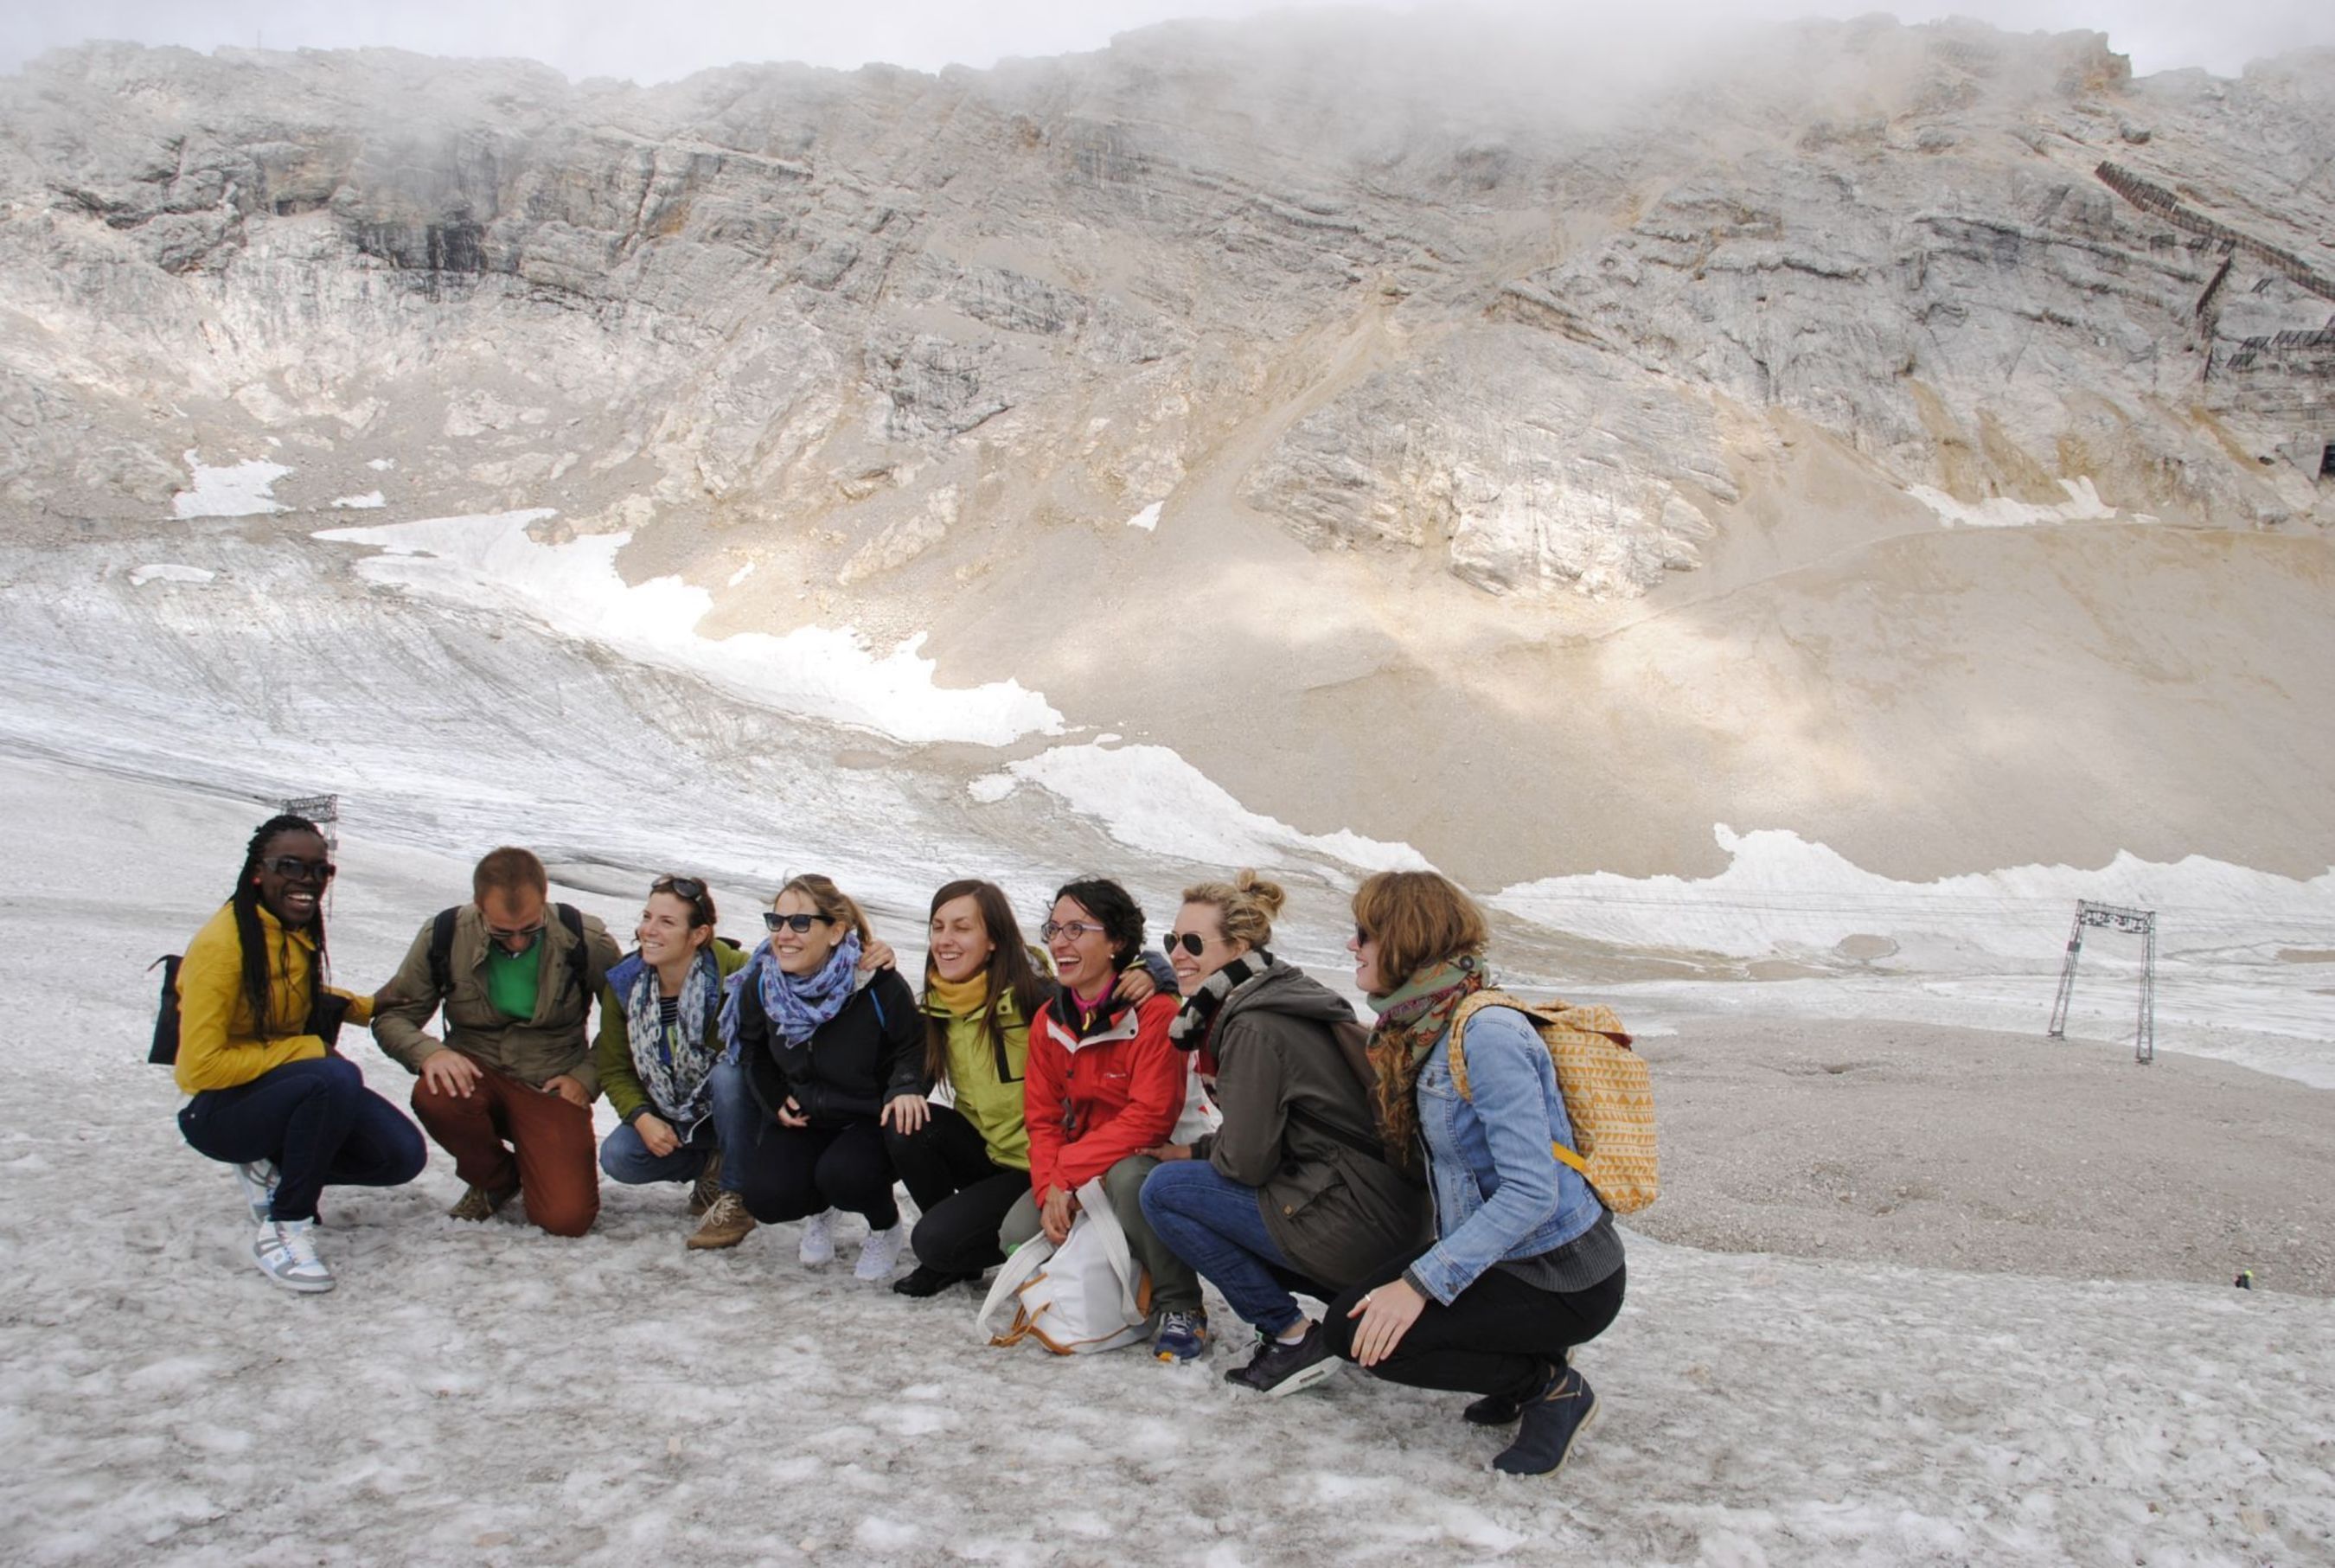 Students and graduates visit the German Meteorological Service (DWD) on Germany's highest mountain "Zugspitze" near Munich, Germany. During the 2015 edition of Climate-KIC's European "The Journey" summer school programme international participants will offer a unique combination of science and entrepreneurship. It will be a crash course to identify opportunities in climate change and how to set up a startup to commercialize solutions. (PRNewsFoto/Climate-KIC)